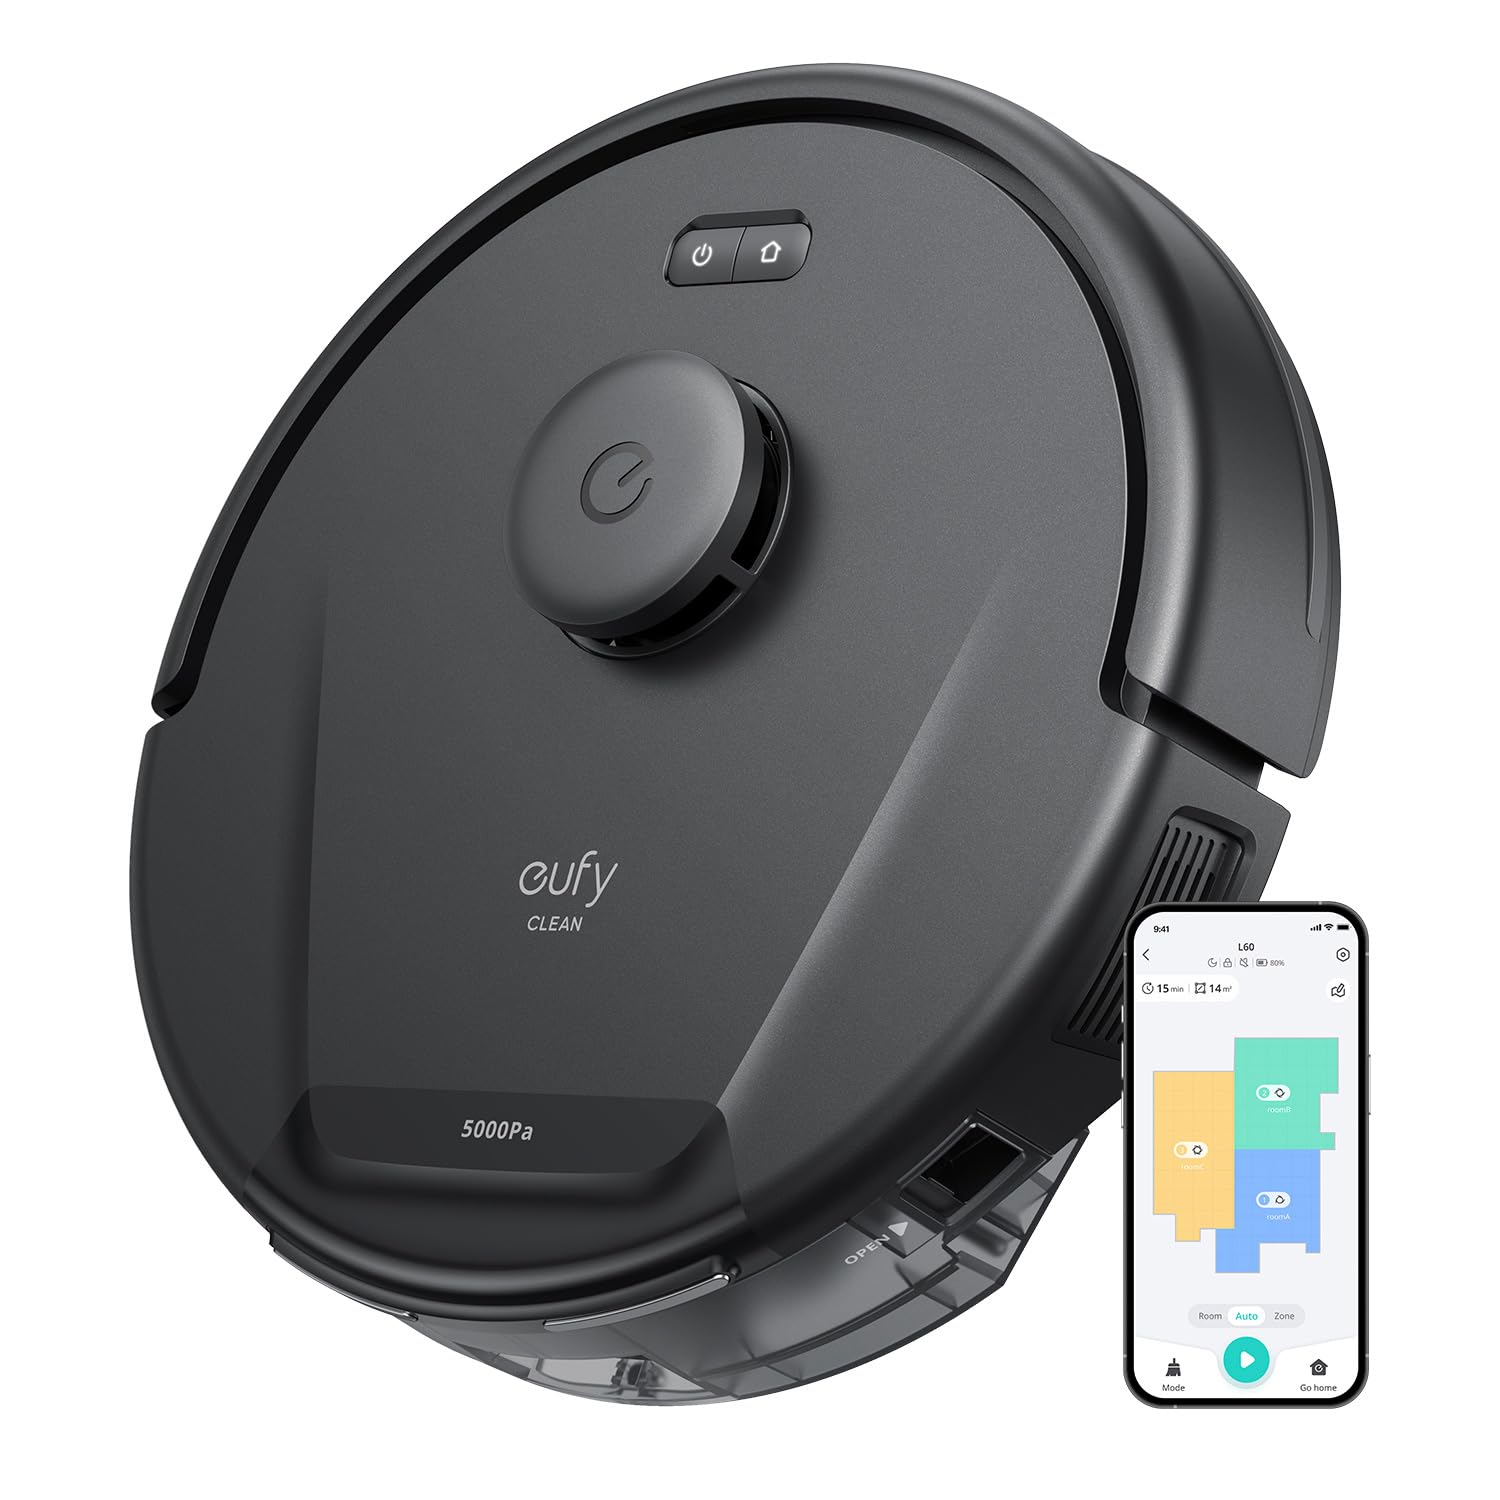 eufy Clean L60 Robot Vacuum w/ 5,000 Pa Suction & iPath Laser Navigation $200 + Free Shipping